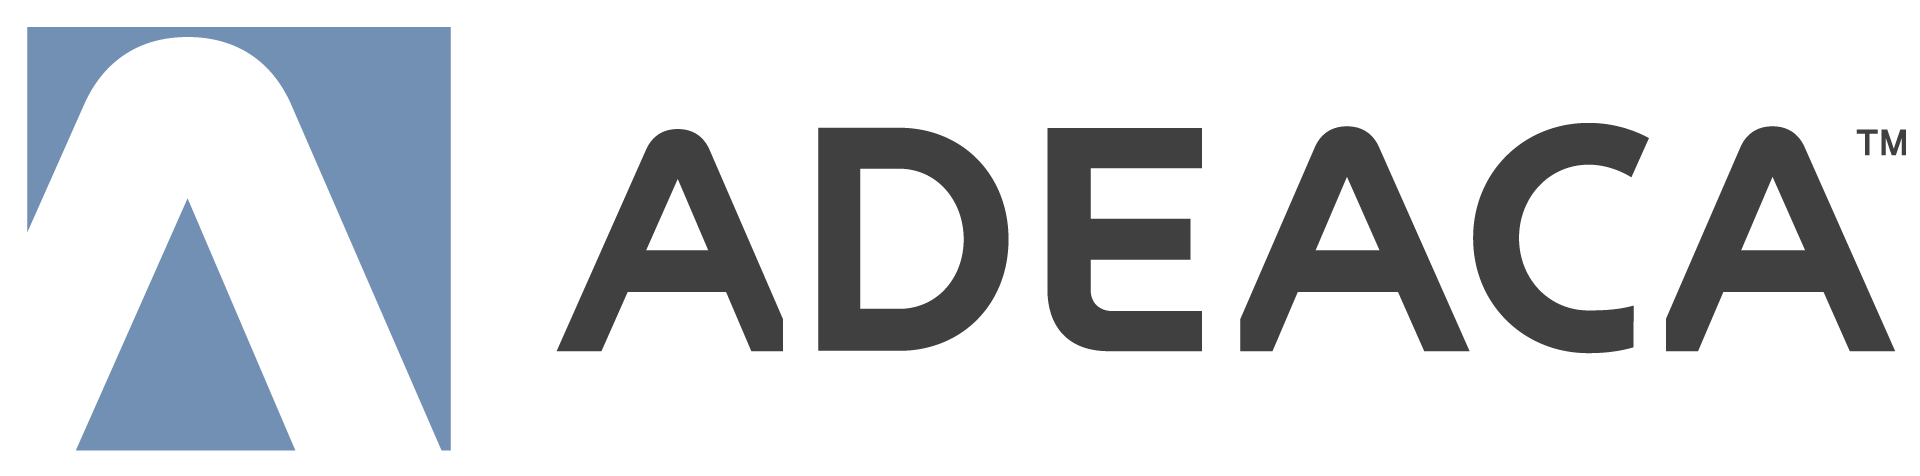 Adeaca Announces Matt Mong VP of Market Innovation and Category Design Accepted into Forbes Business Development Council